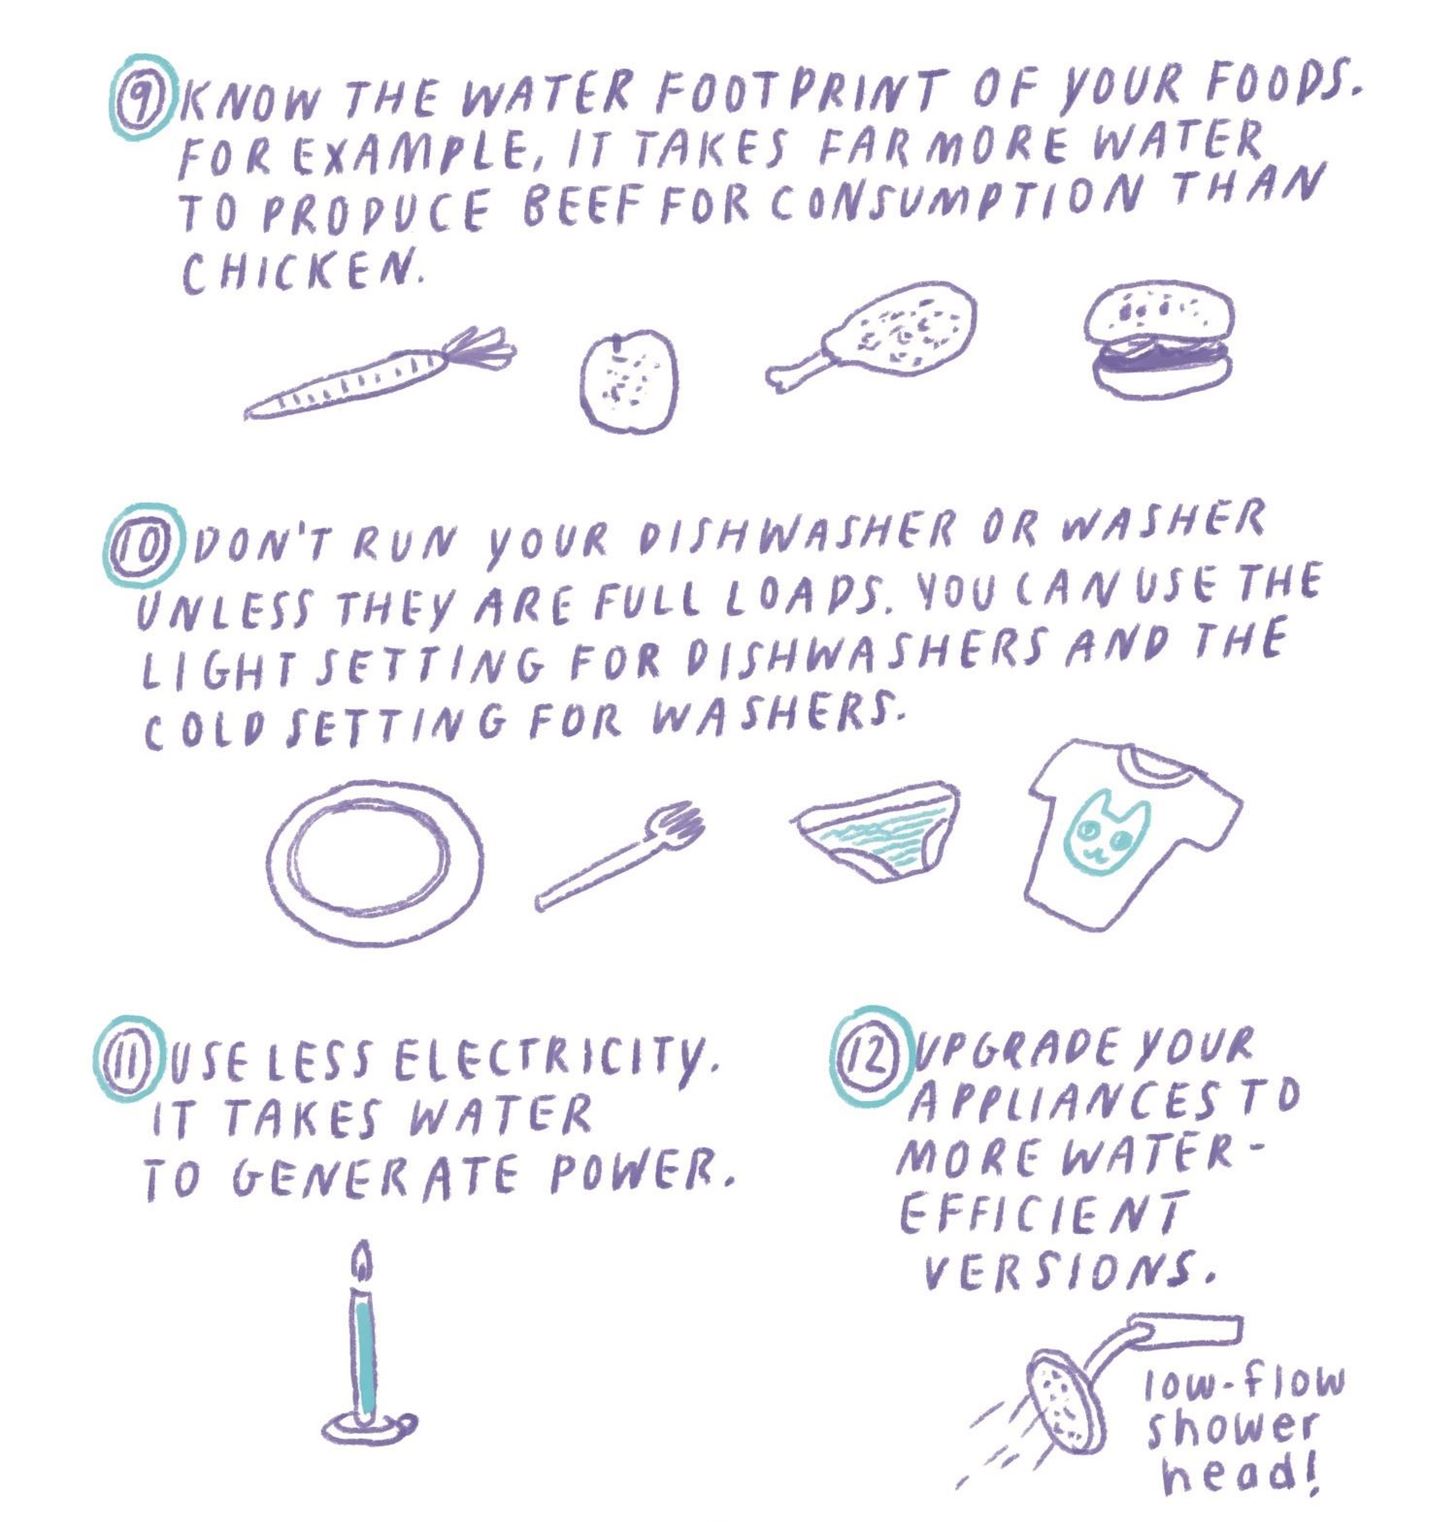 Stop Wasting Water: 15 Ways to Conserve More Water During a Drought